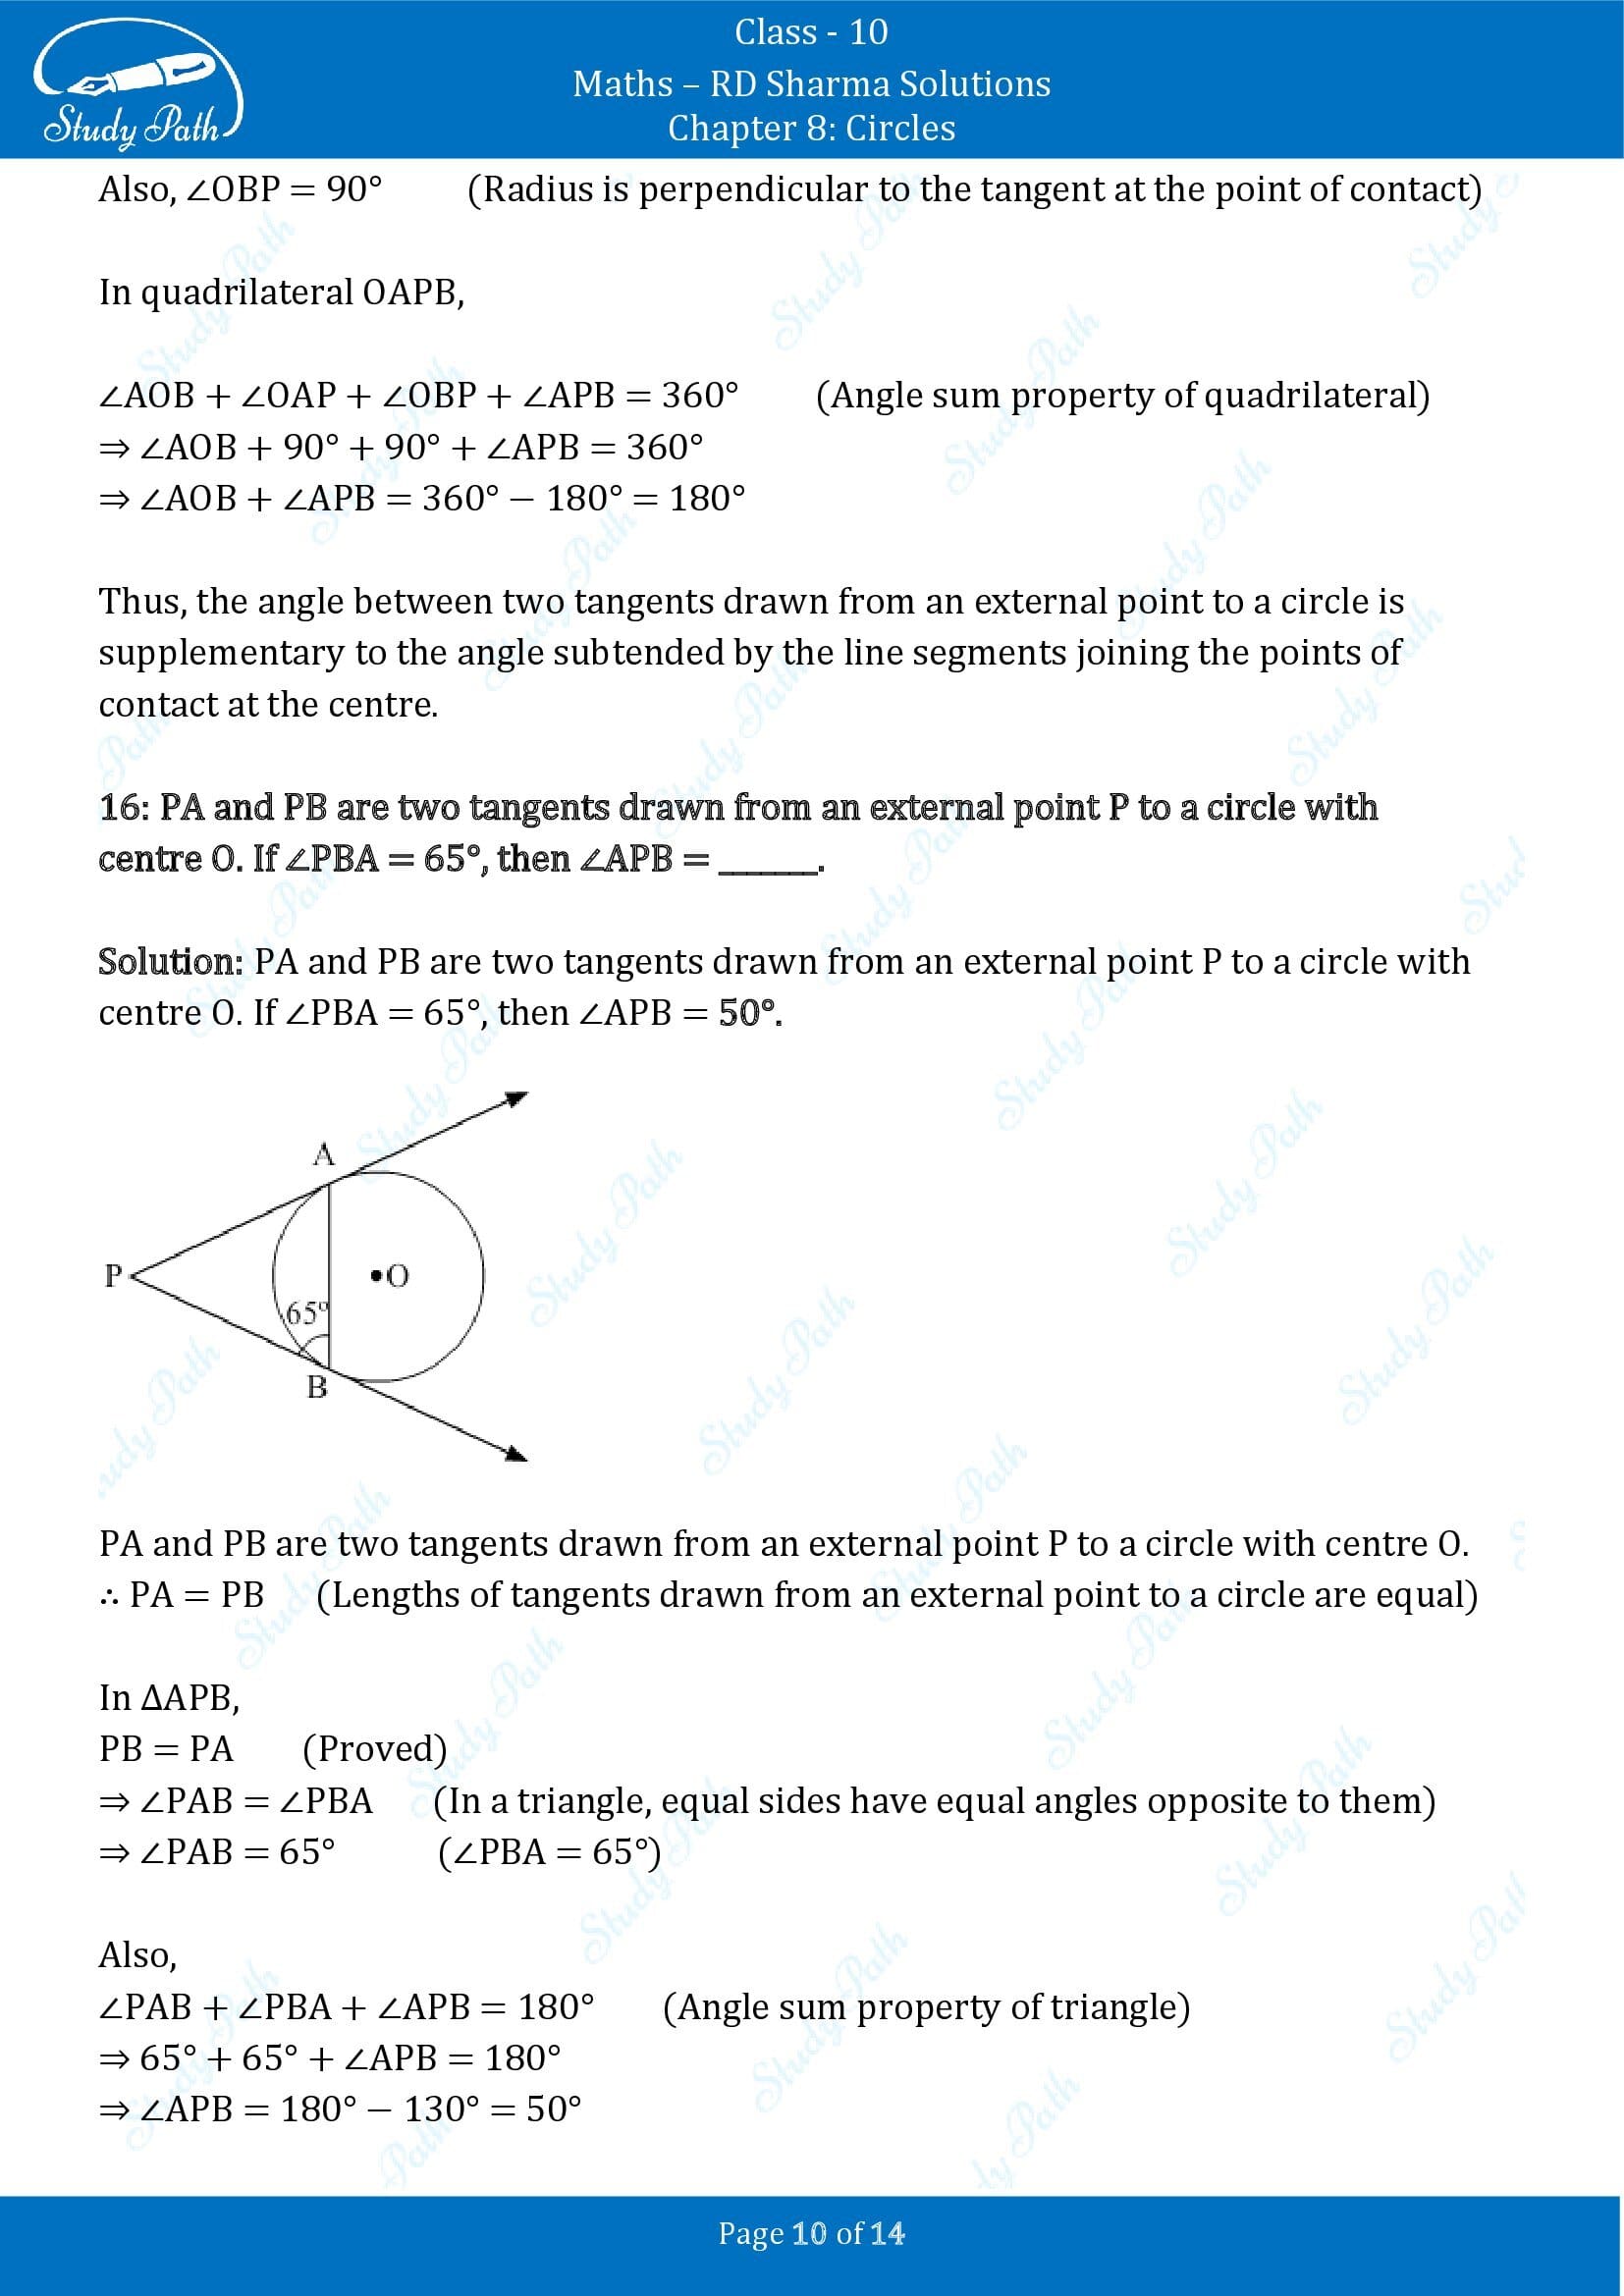 RD Sharma Solutions Class 10 Chapter 8 Circles Fill in the Blank Type Questions FBQs 00010